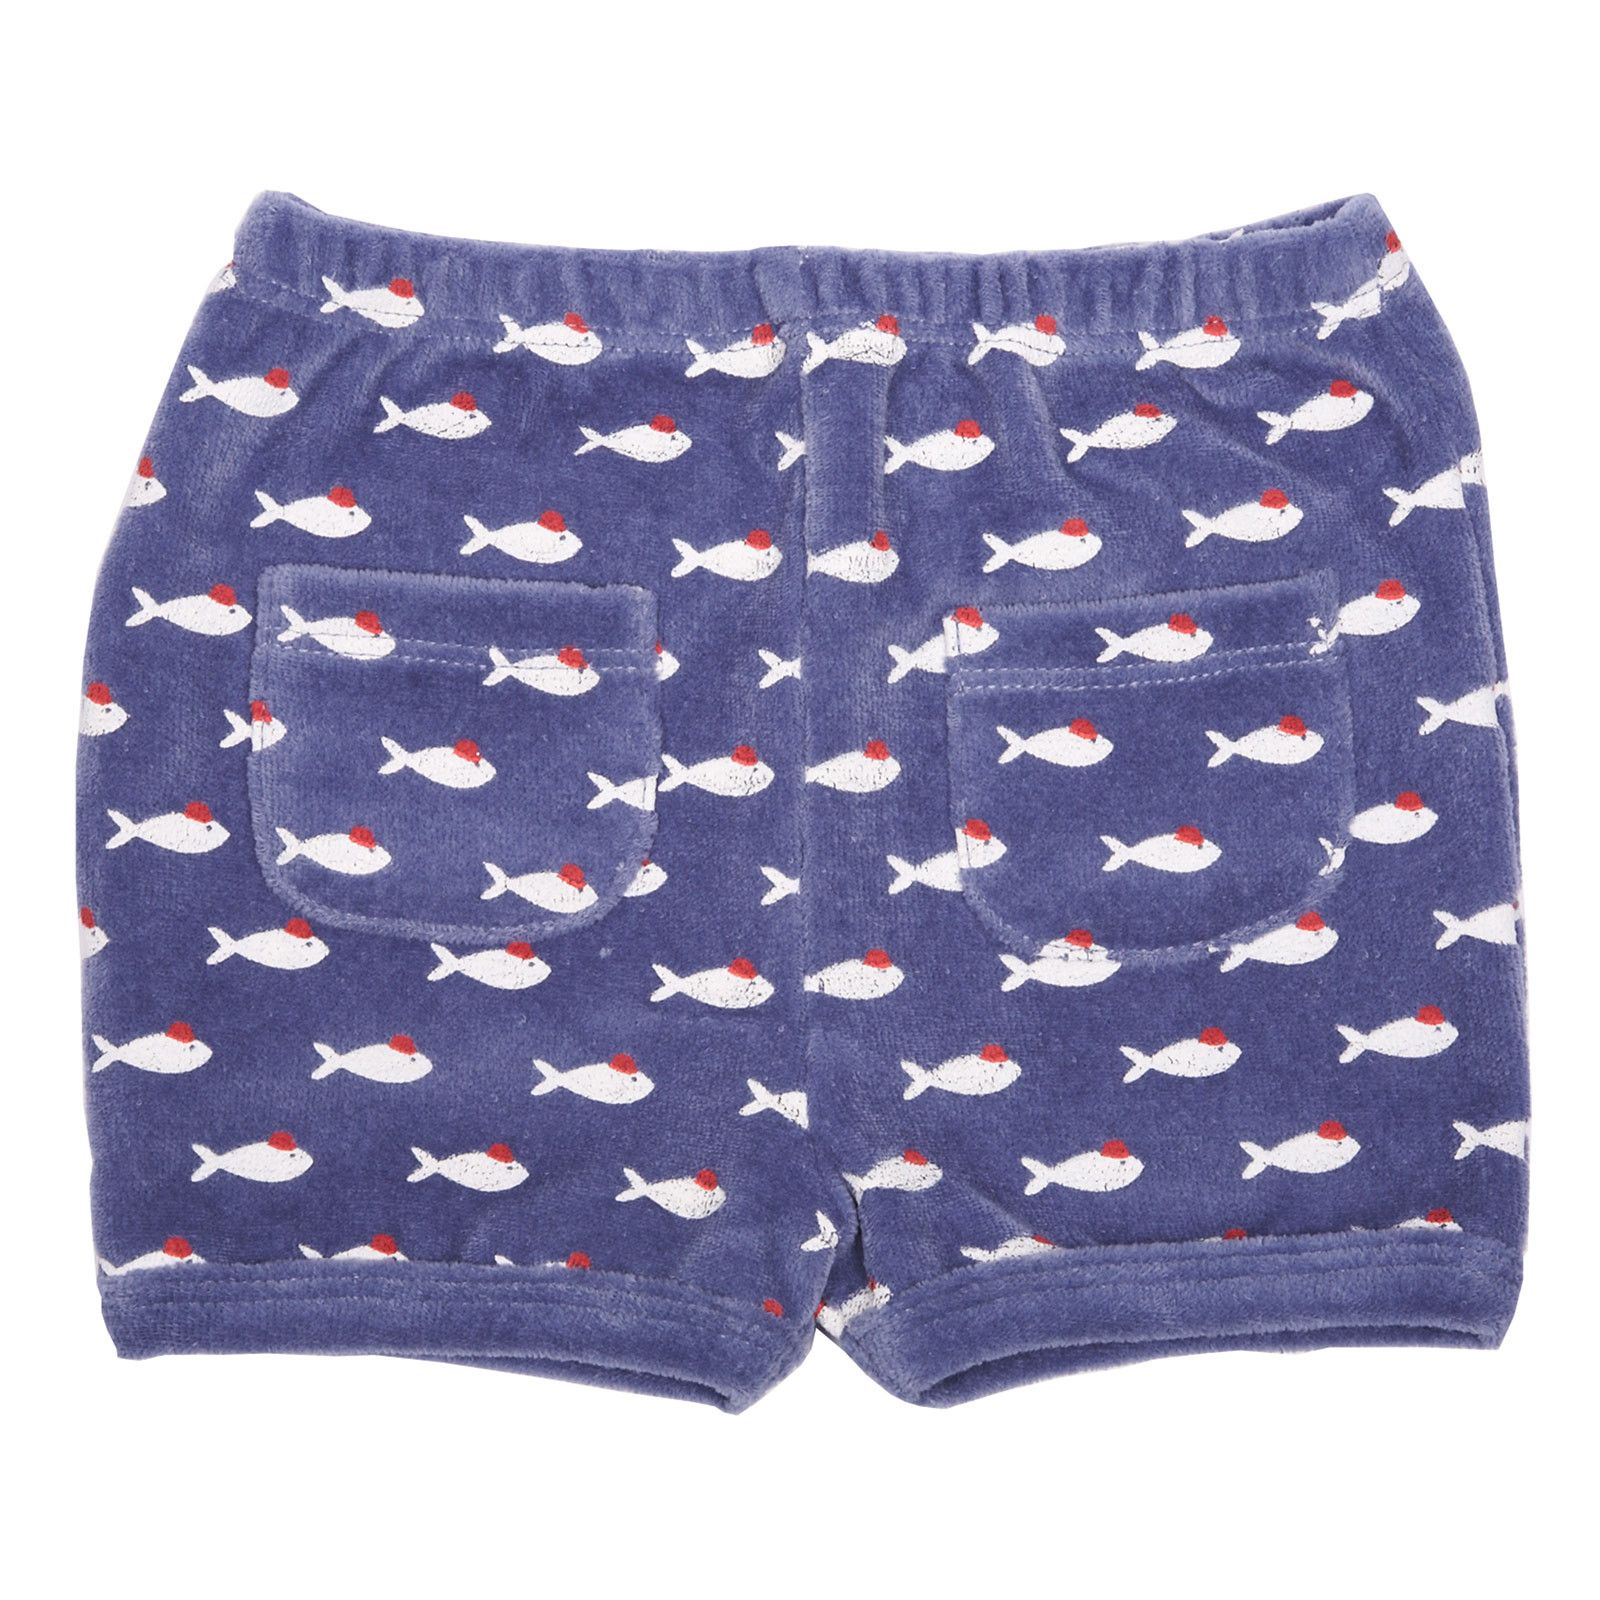 Baby Blue Short With Grey Fish Print - CÉMAROSE | Children's Fashion Store